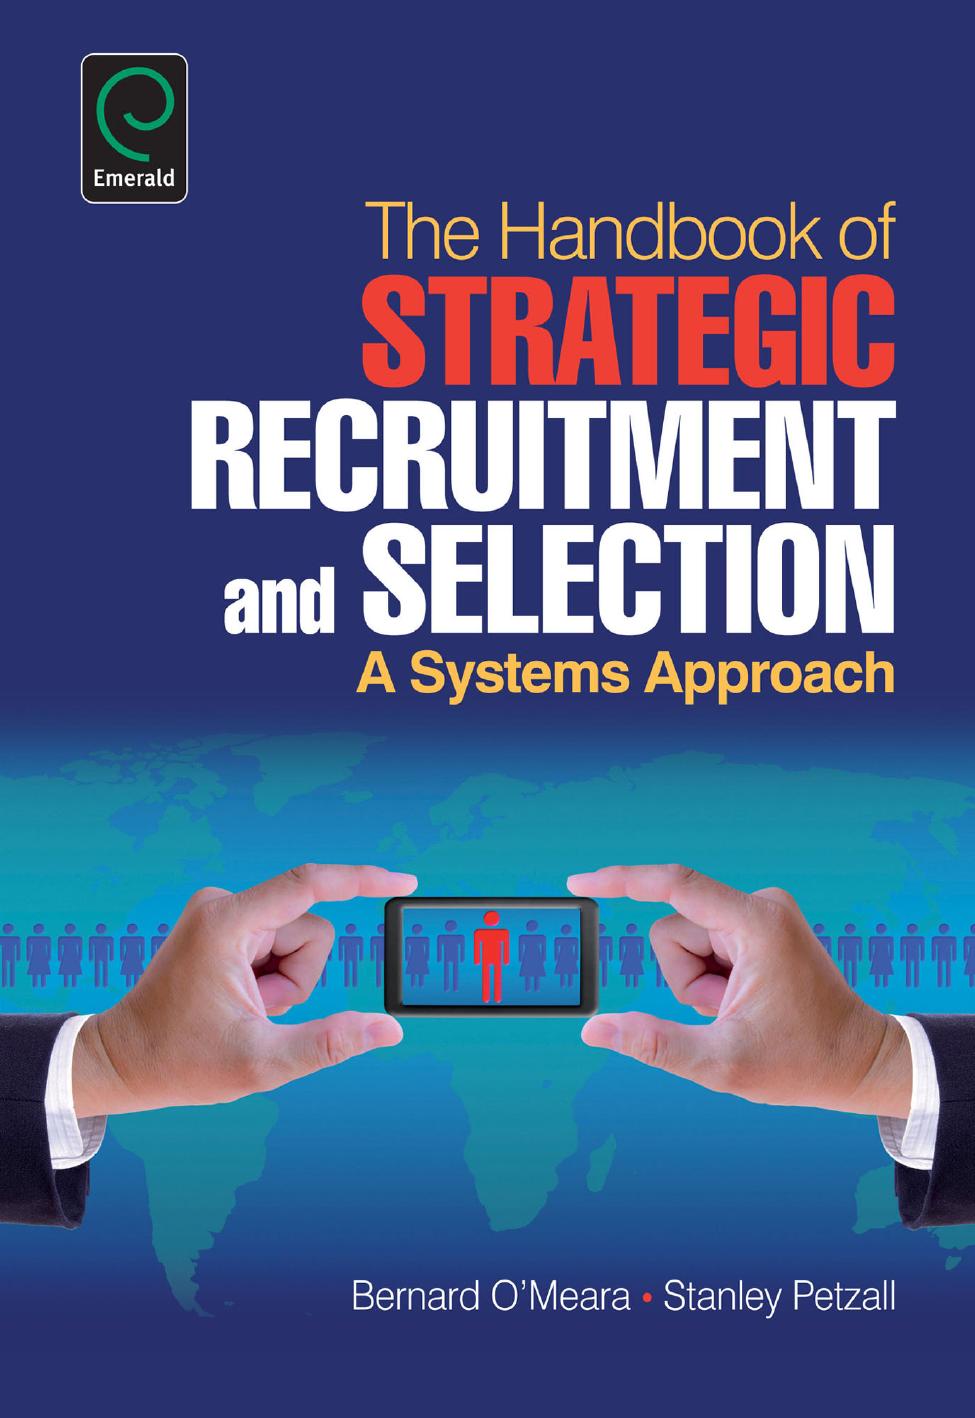 Handbook of Strategic Recruitment and Selection: A Systems Approach by Bernard O'Meara; Stanley Petzall